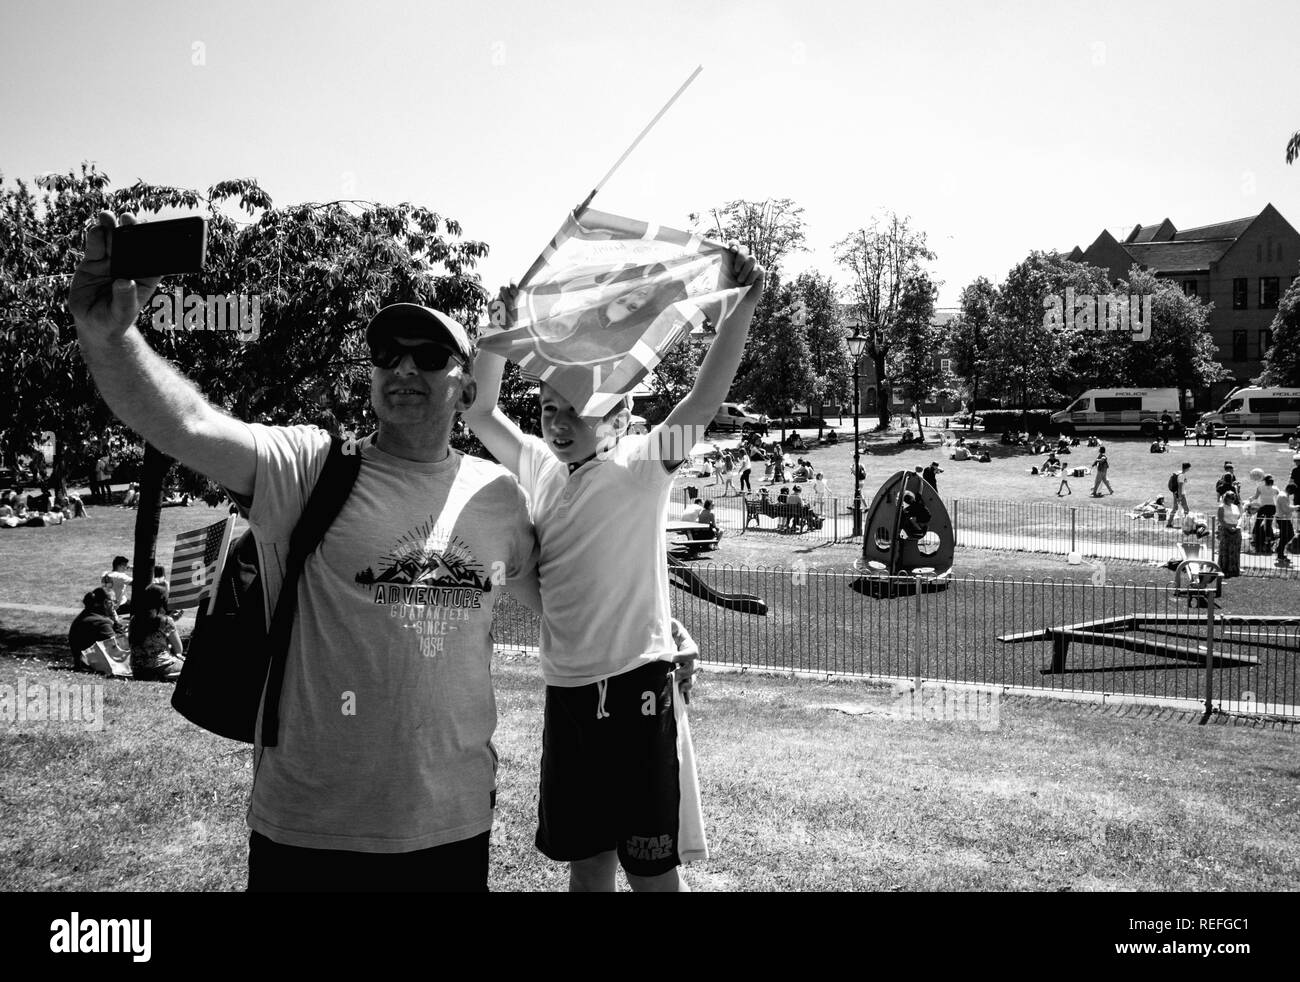 WINDSOR, UNITED KINGDOM - MAY 19, 2018: Father and son taking selfie with Prince Harry and Meghan Markel flag in Windsor after royal wedding - black and white  Stock Photo